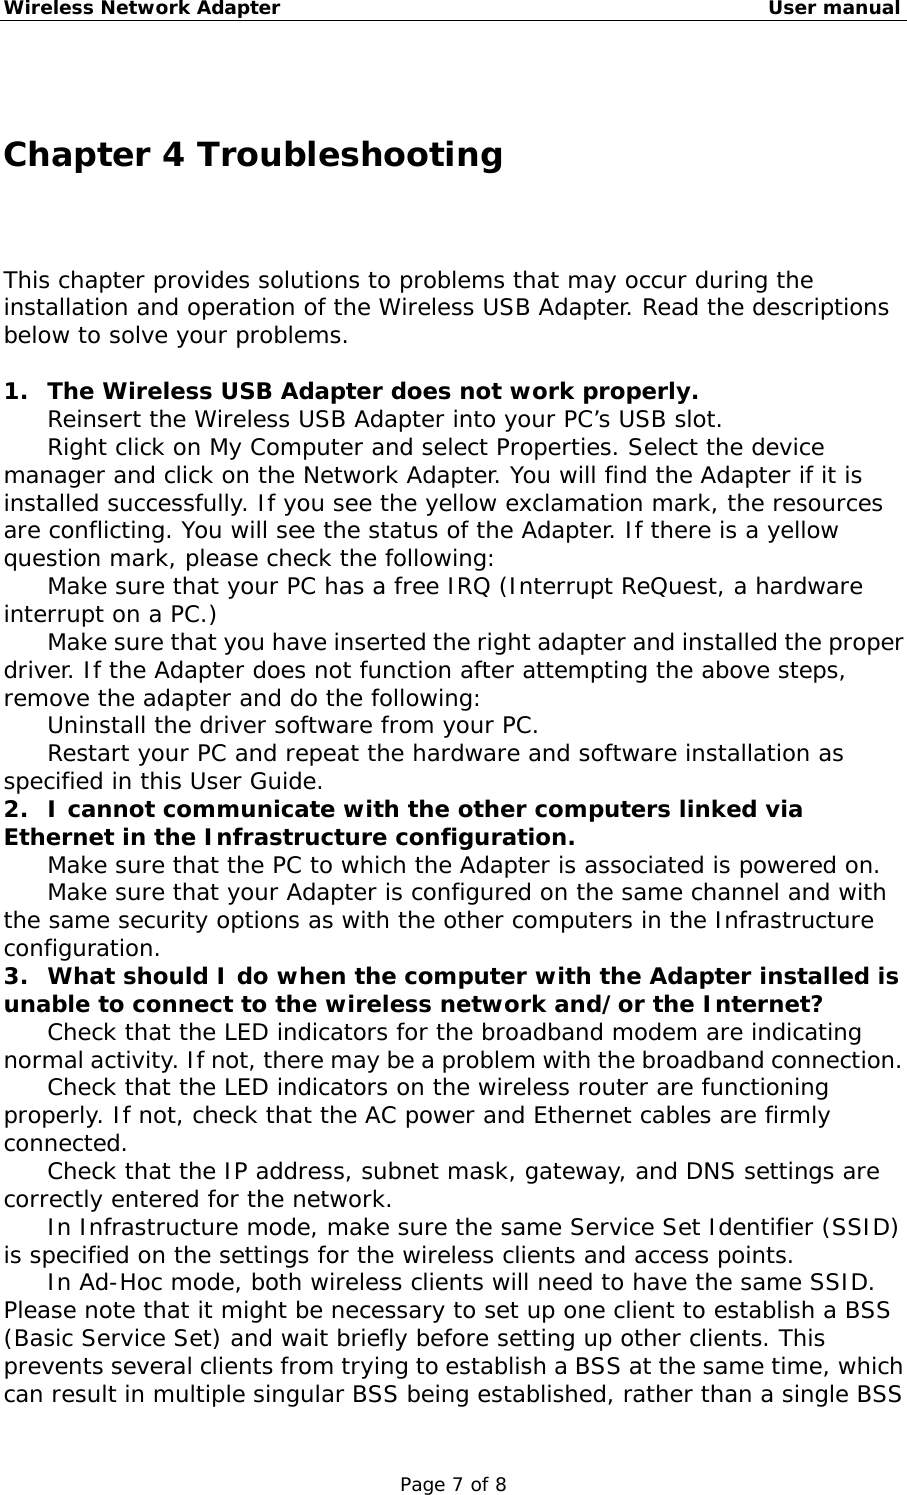 Wireless Network Adapter                                                    User manual Page 7 of 8  Chapter 4 Troubleshooting This chapter provides solutions to problems that may occur during the installation and operation of the Wireless USB Adapter. Read the descriptions below to solve your problems.   1.  The Wireless USB Adapter does not work properly. 　  Reinsert the Wireless USB Adapter into your PC’s USB slot. 　  Right click on My Computer and select Properties. Select the device manager and click on the Network Adapter. You will find the Adapter if it is installed successfully. If you see the yellow exclamation mark, the resources are conflicting. You will see the status of the Adapter. If there is a yellow question mark, please check the following: 　  Make sure that your PC has a free IRQ (Interrupt ReQuest, a hardware interrupt on a PC.) 　  Make sure that you have inserted the right adapter and installed the proper driver. If the Adapter does not function after attempting the above steps, remove the adapter and do the following: 　  Uninstall the driver software from your PC. 　  Restart your PC and repeat the hardware and software installation as specified in this User Guide. 2.  I cannot communicate with the other computers linked via Ethernet in the Infrastructure configuration. 　  Make sure that the PC to which the Adapter is associated is powered on. 　  Make sure that your Adapter is configured on the same channel and with the same security options as with the other computers in the Infrastructure configuration. 3.  What should I do when the computer with the Adapter installed is unable to connect to the wireless network and/or the Internet? 　  Check that the LED indicators for the broadband modem are indicating normal activity. If not, there may be a problem with the broadband connection. 　  Check that the LED indicators on the wireless router are functioning properly. If not, check that the AC power and Ethernet cables are firmly connected. 　  Check that the IP address, subnet mask, gateway, and DNS settings are correctly entered for the network. 　  In Infrastructure mode, make sure the same Service Set Identifier (SSID) is specified on the settings for the wireless clients and access points.  　  In Ad-Hoc mode, both wireless clients will need to have the same SSID. Please note that it might be necessary to set up one client to establish a BSS (Basic Service Set) and wait briefly before setting up other clients. This prevents several clients from trying to establish a BSS at the same time, which can result in multiple singular BSS being established, rather than a single BSS 